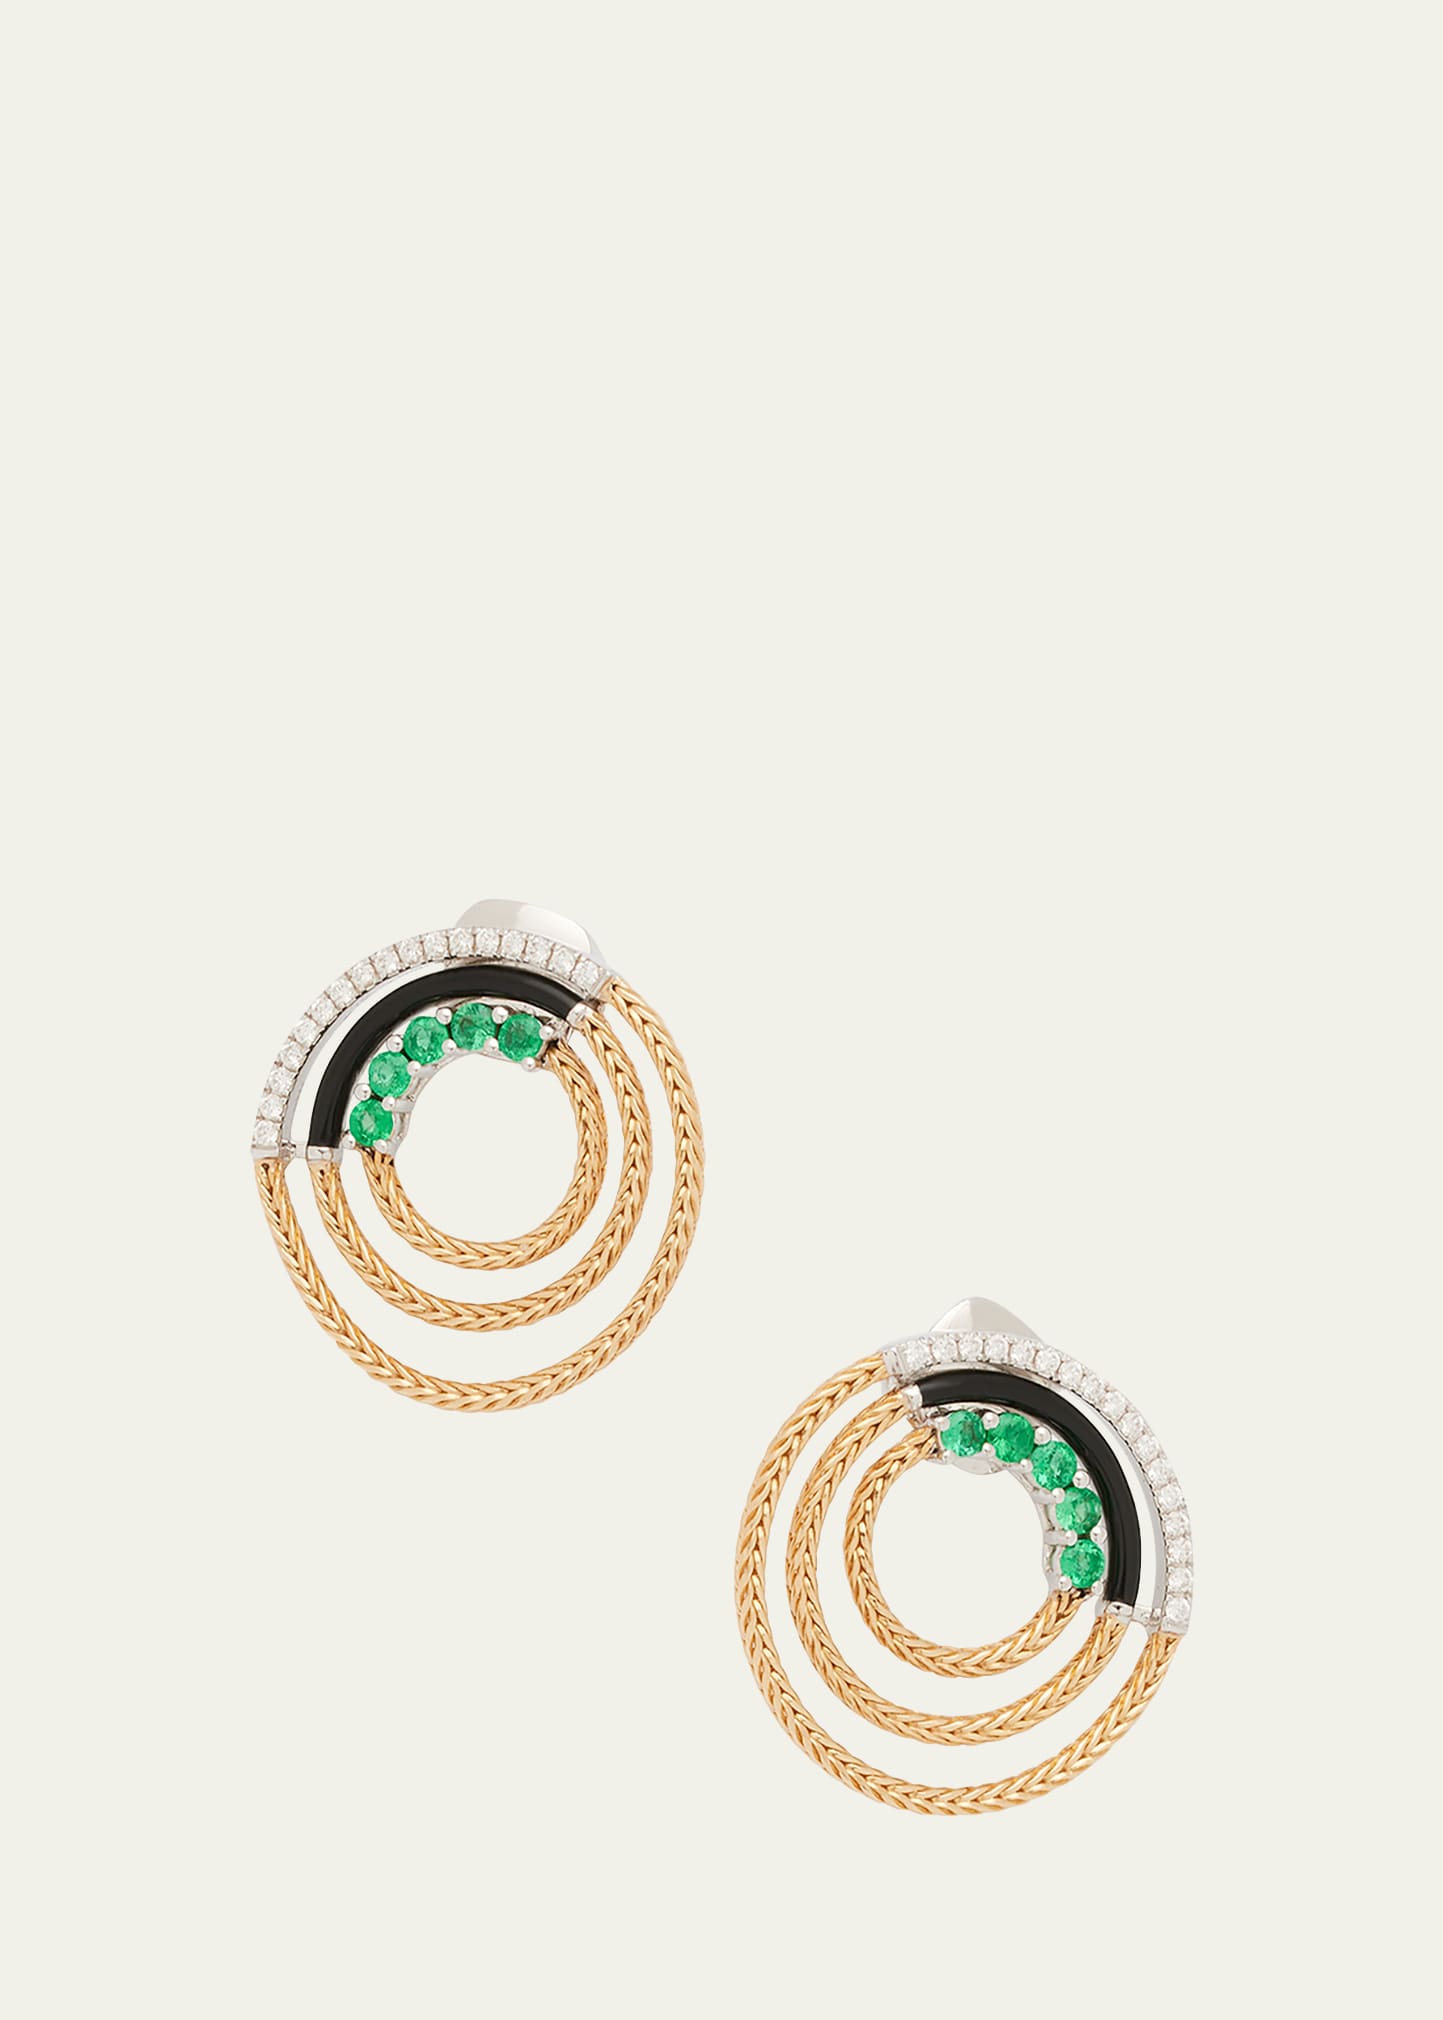 Together Multi-Circle Earrings with Emeralds, White Diamonds and Black Enamel in Two-Tone 18K Gold